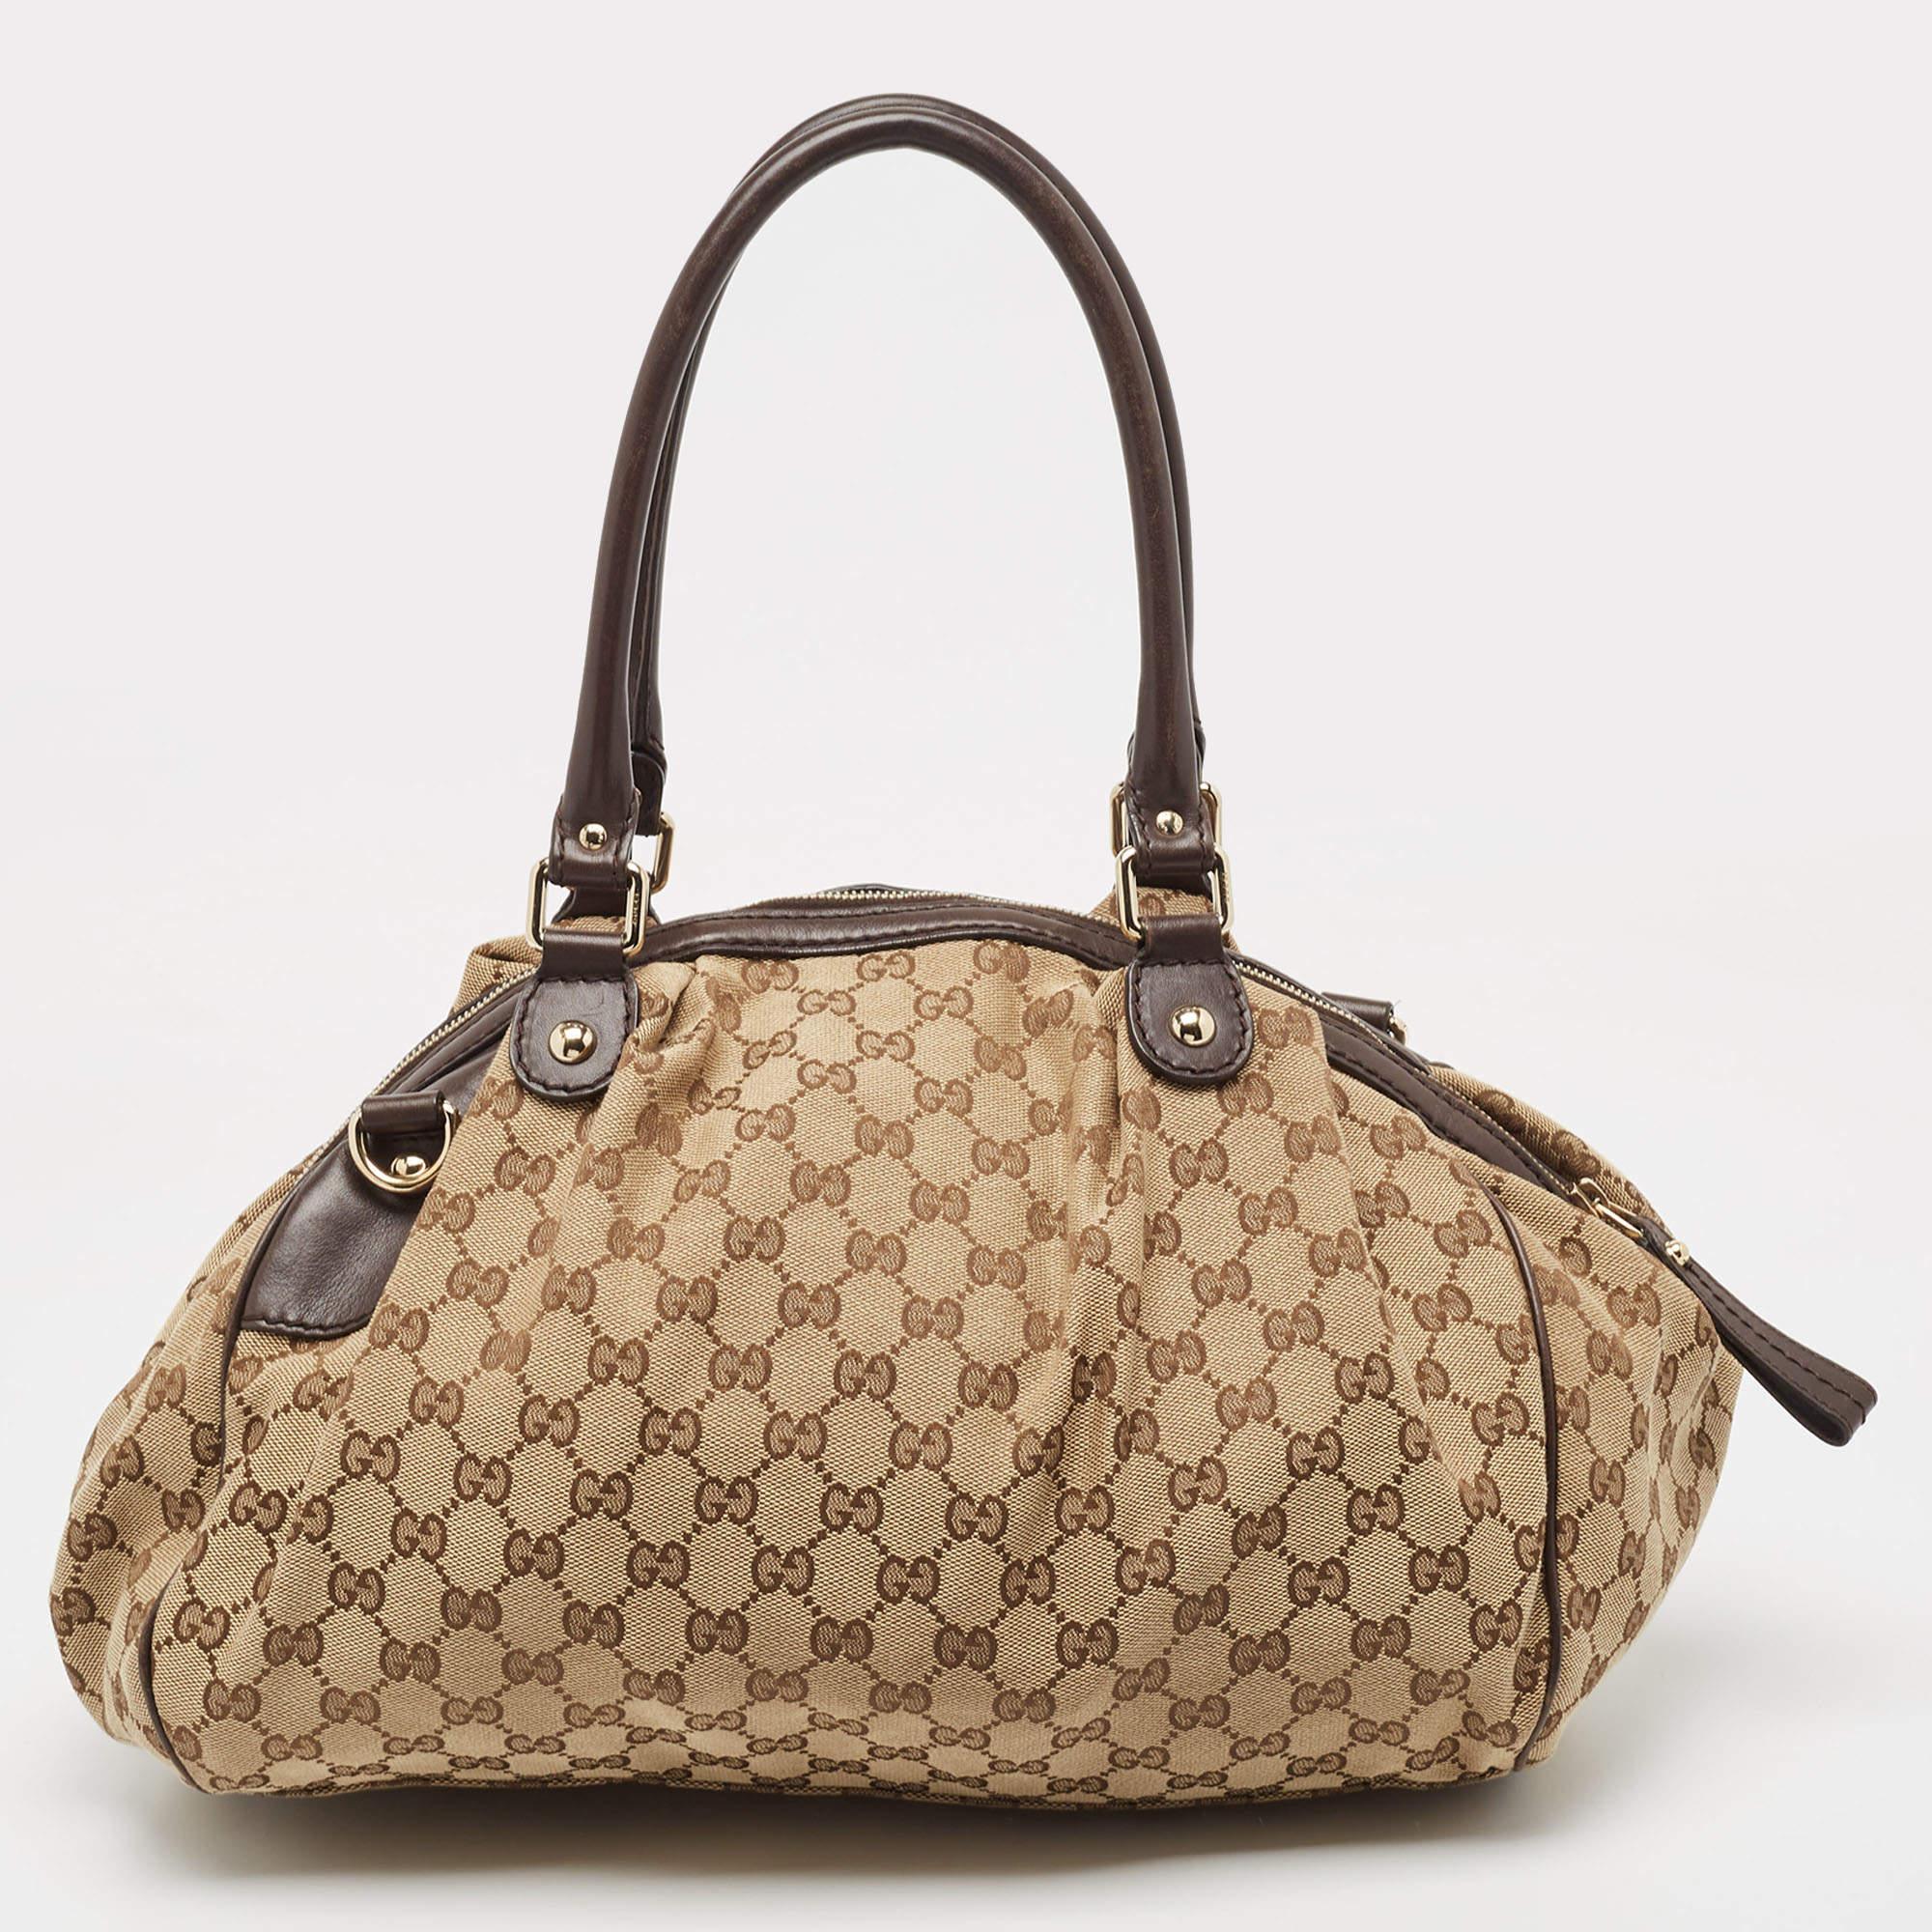 Gucci Brown/Beige GG Canvas and Leather Sukey Boston Bag 10